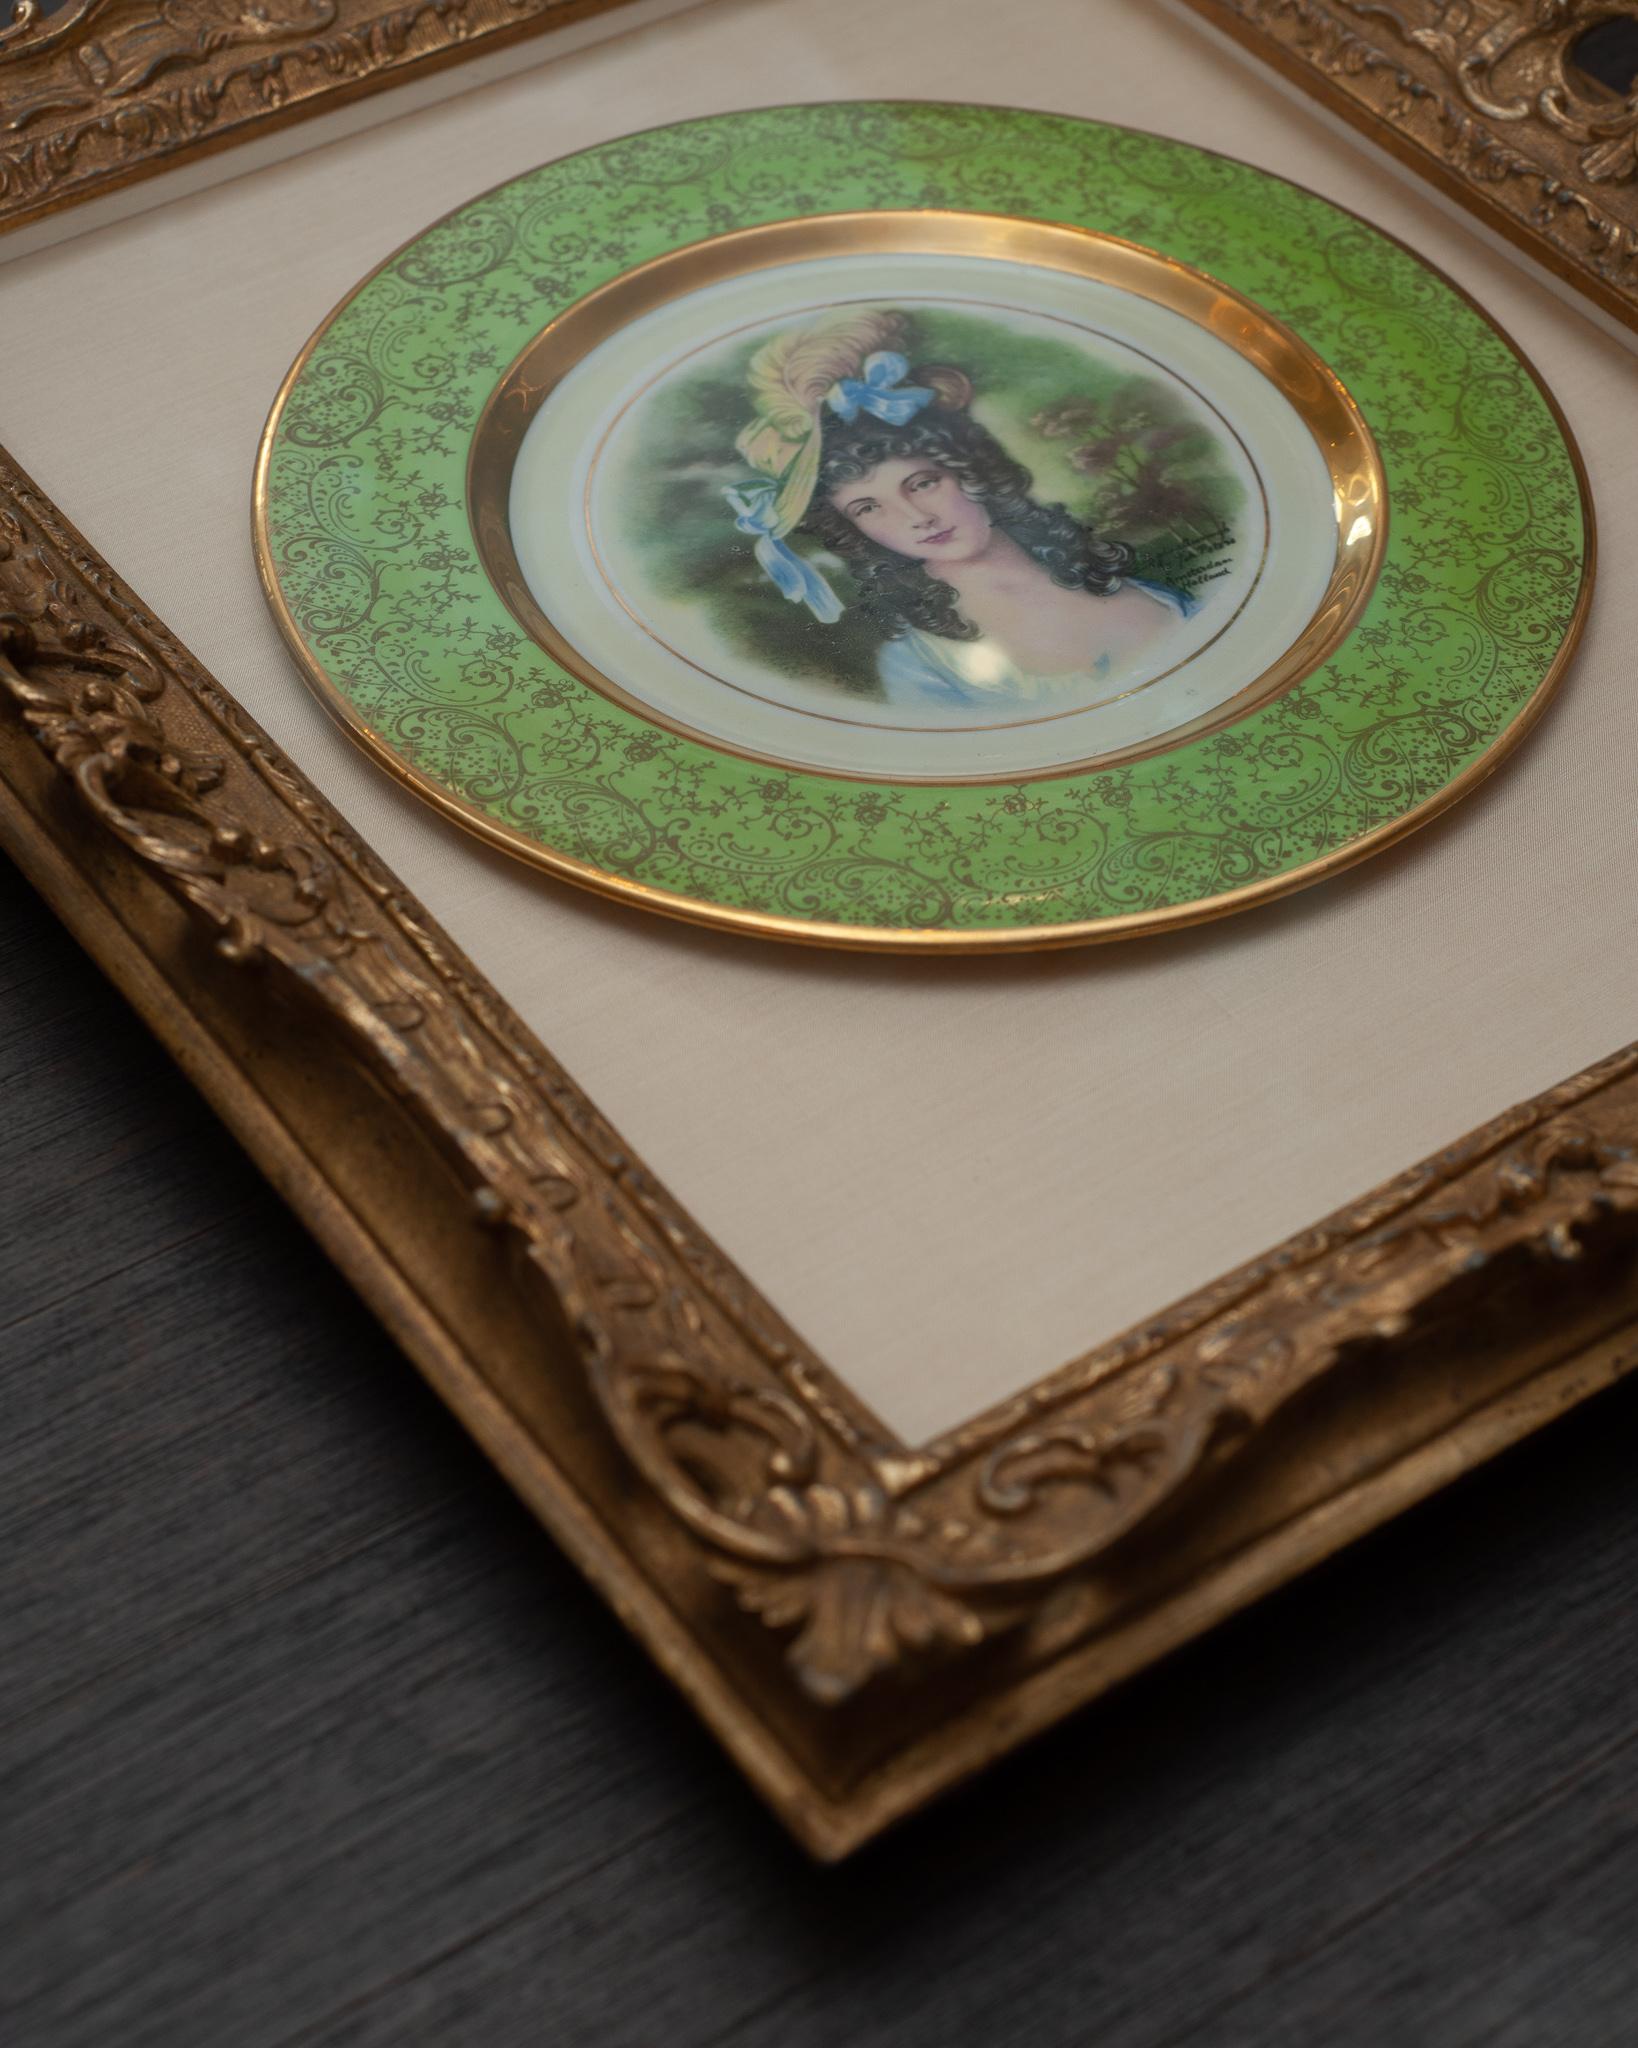 Dutch Antique Handpainted Osborne China Plate Mounted in Gold Gilt Carved Wood Frame For Sale